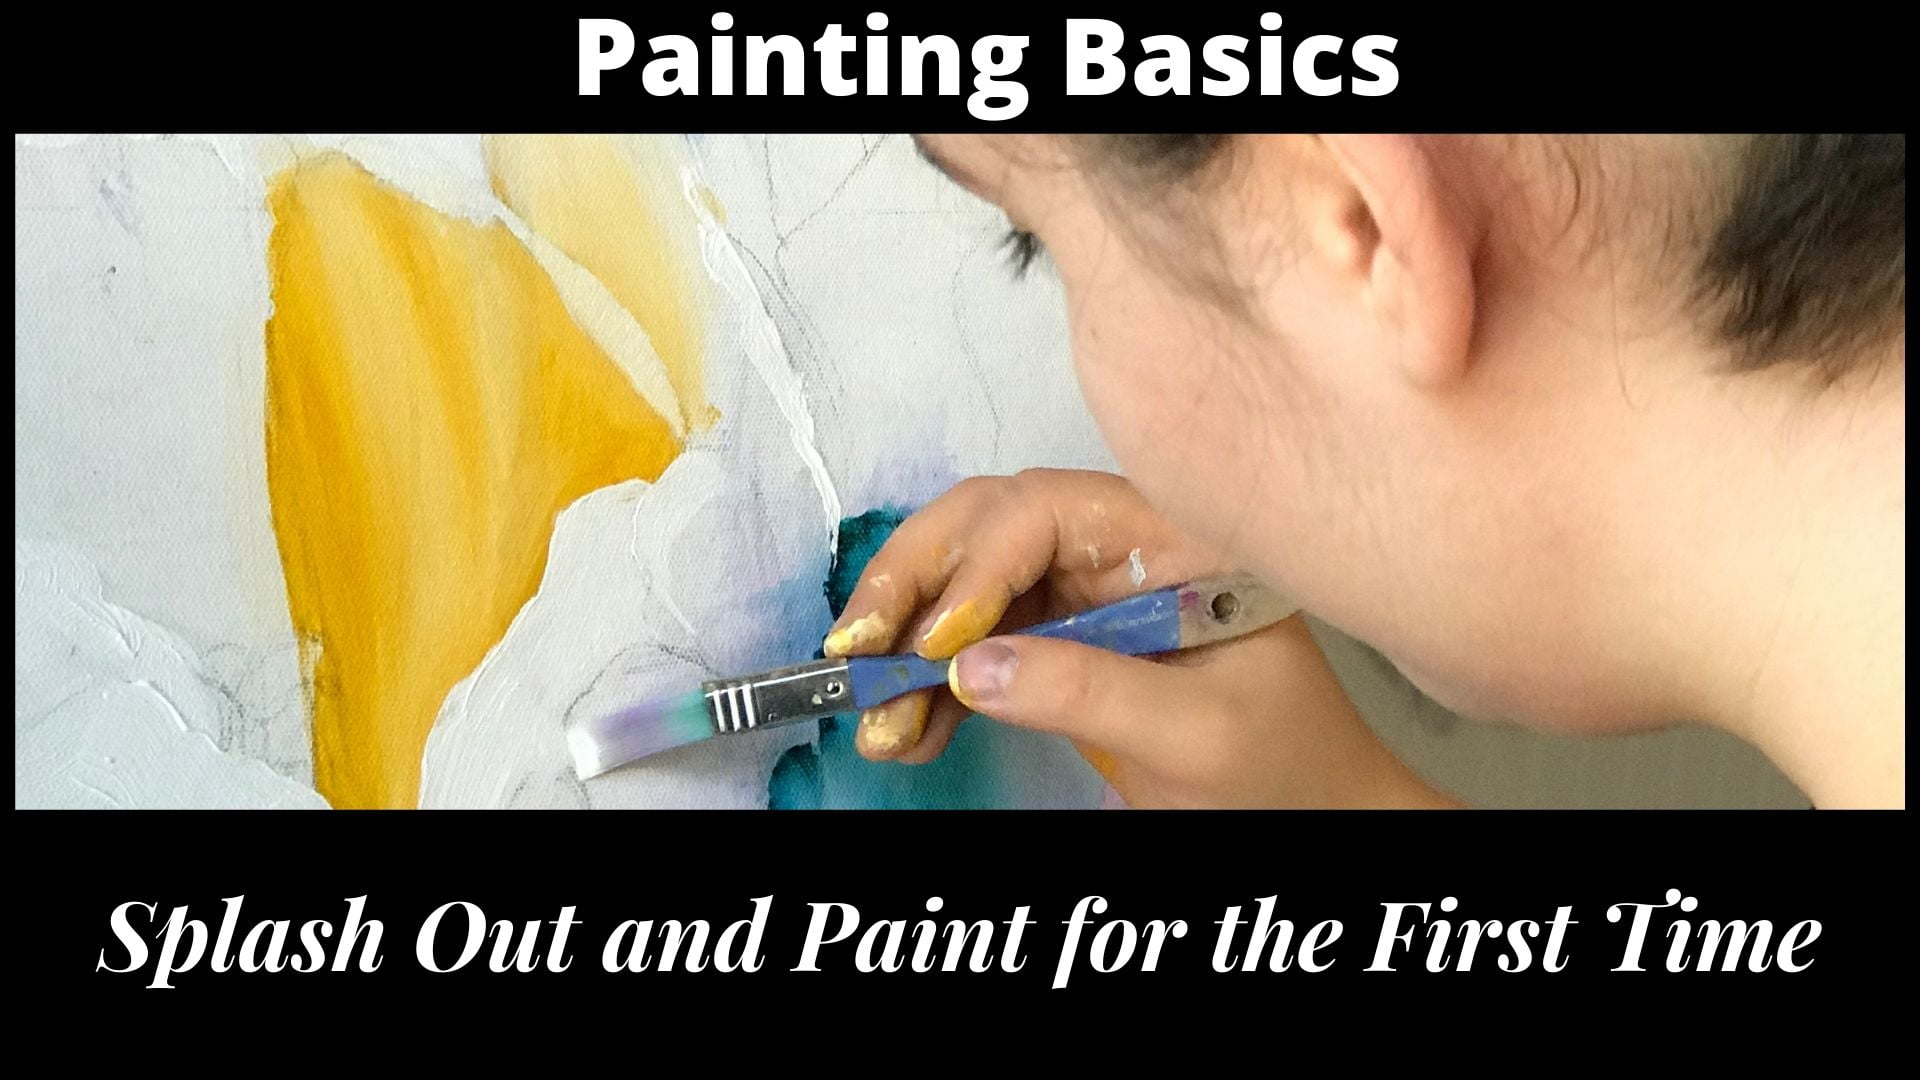 painting basics online course